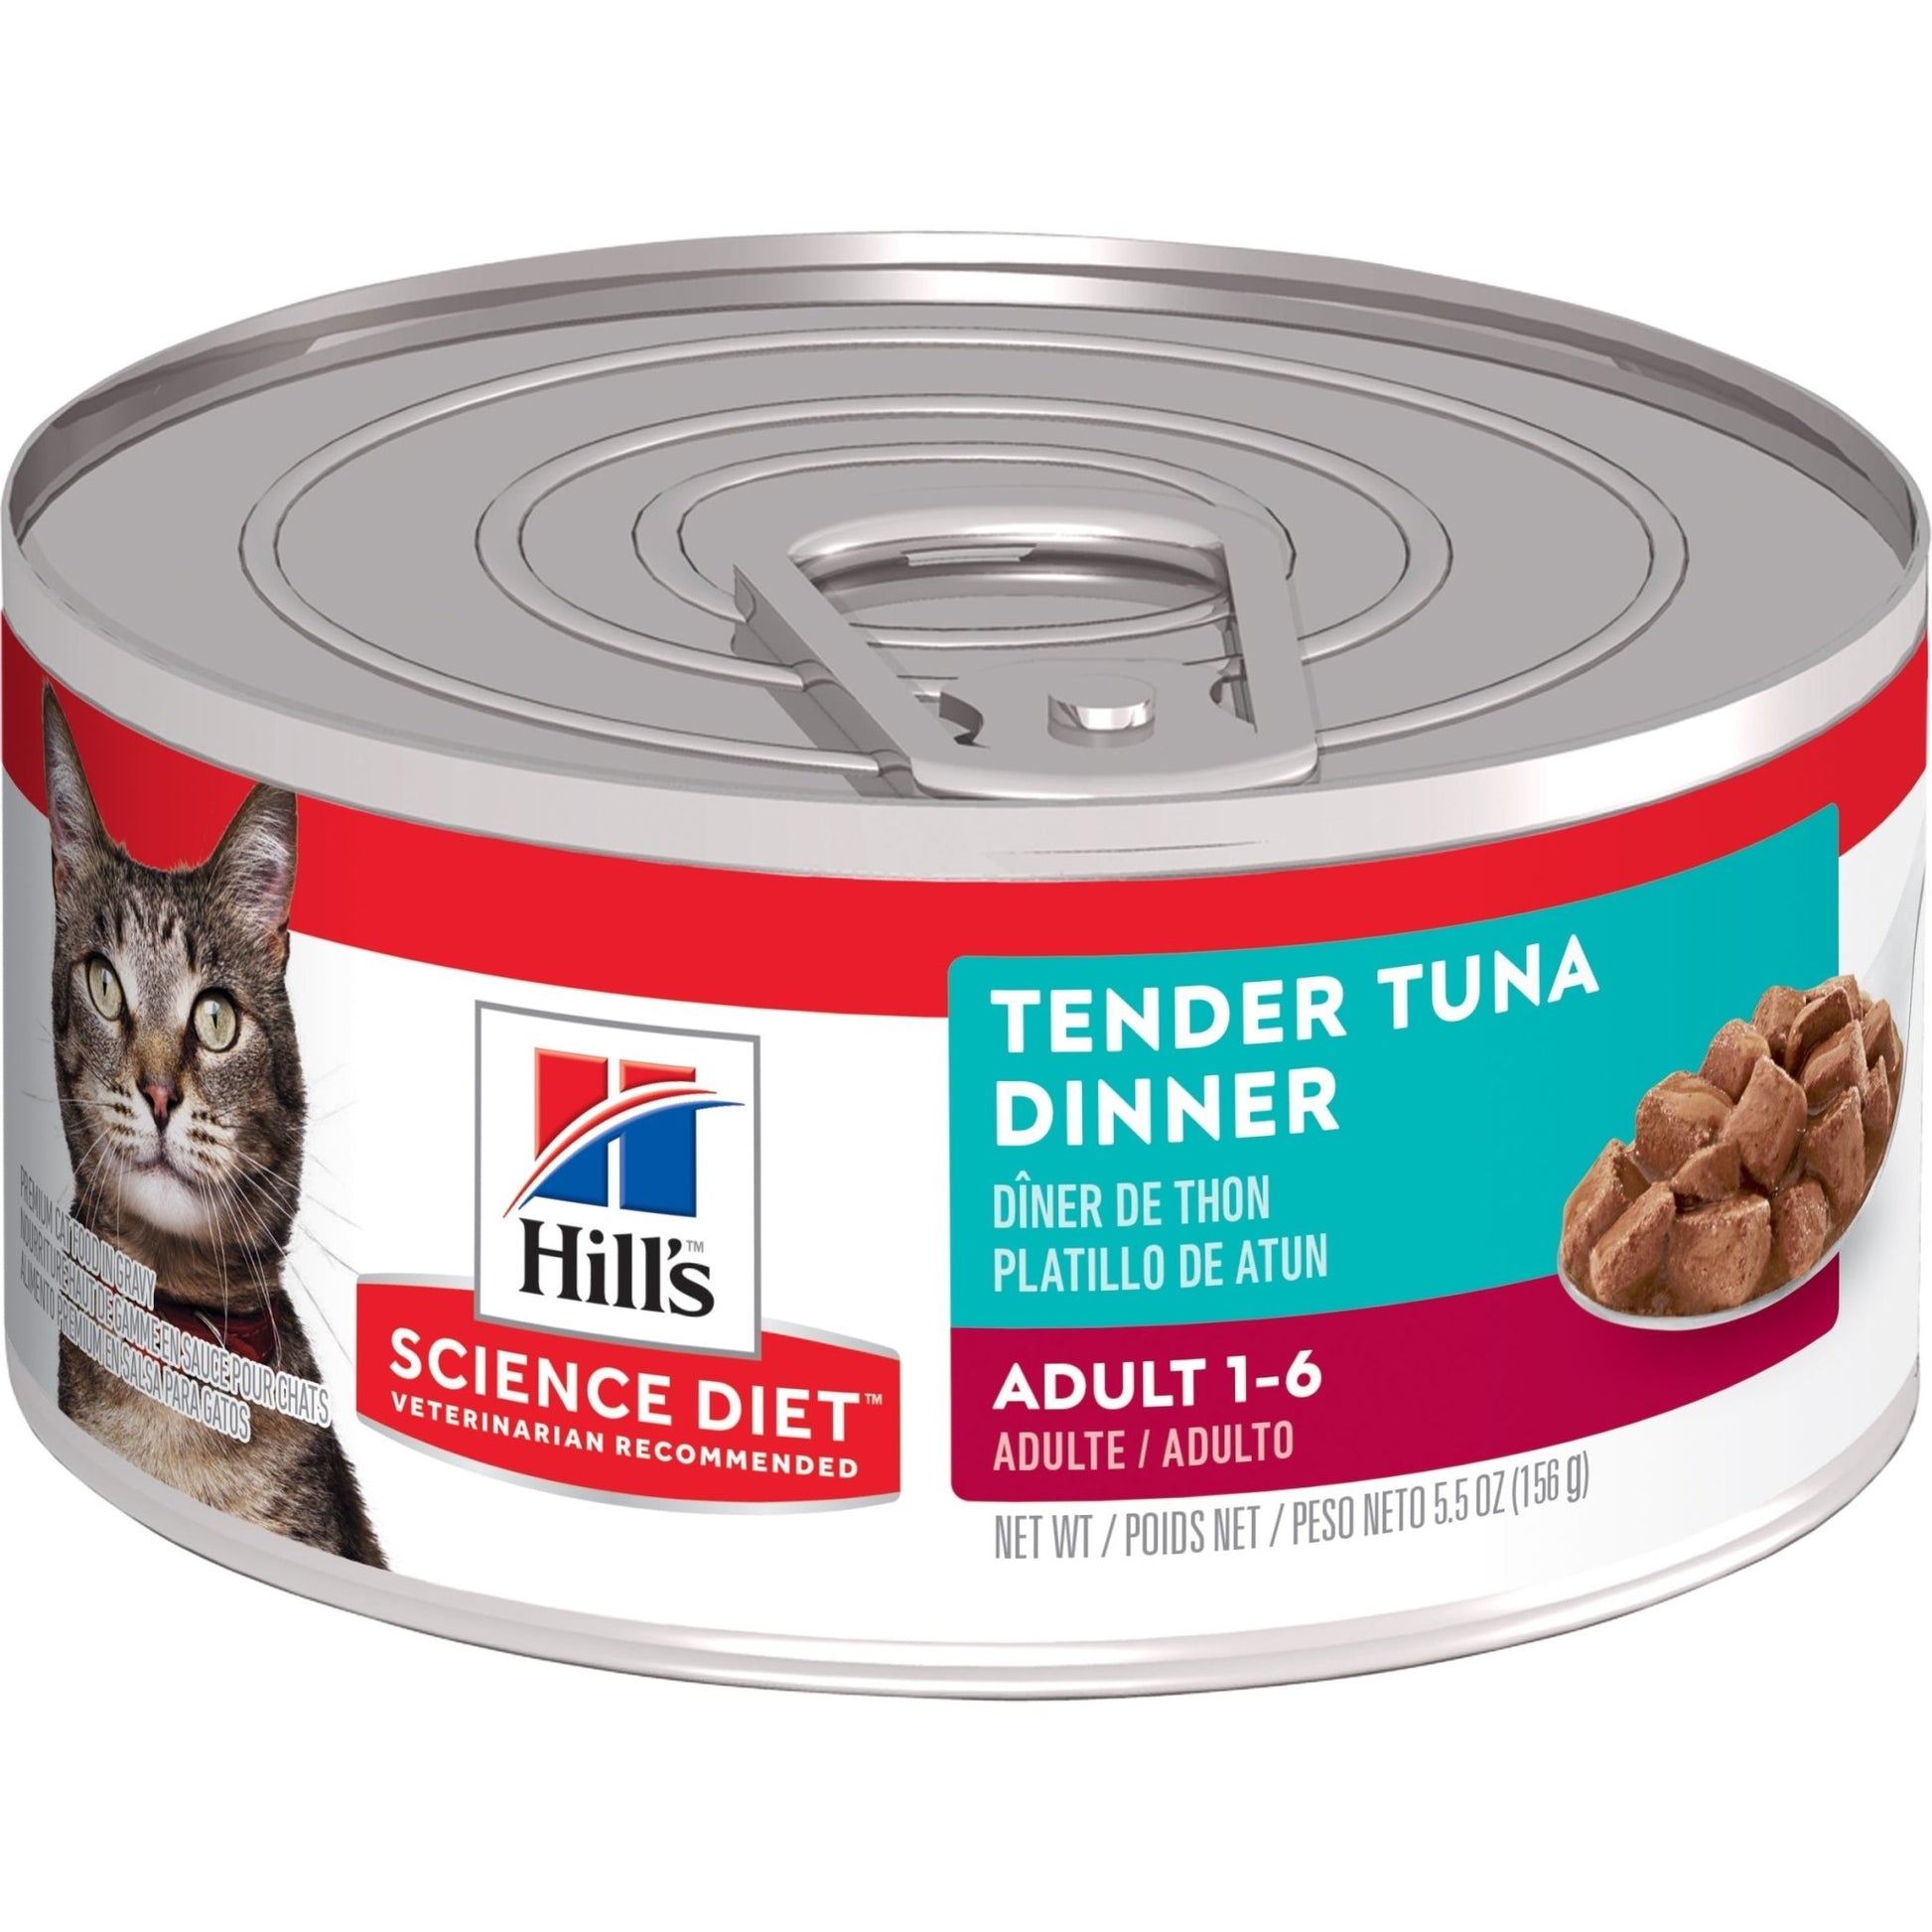 Hill's Science Diet Adult Tender Dinners Tuna Canned Cat Food 156g - Woonona Petfood & Produce